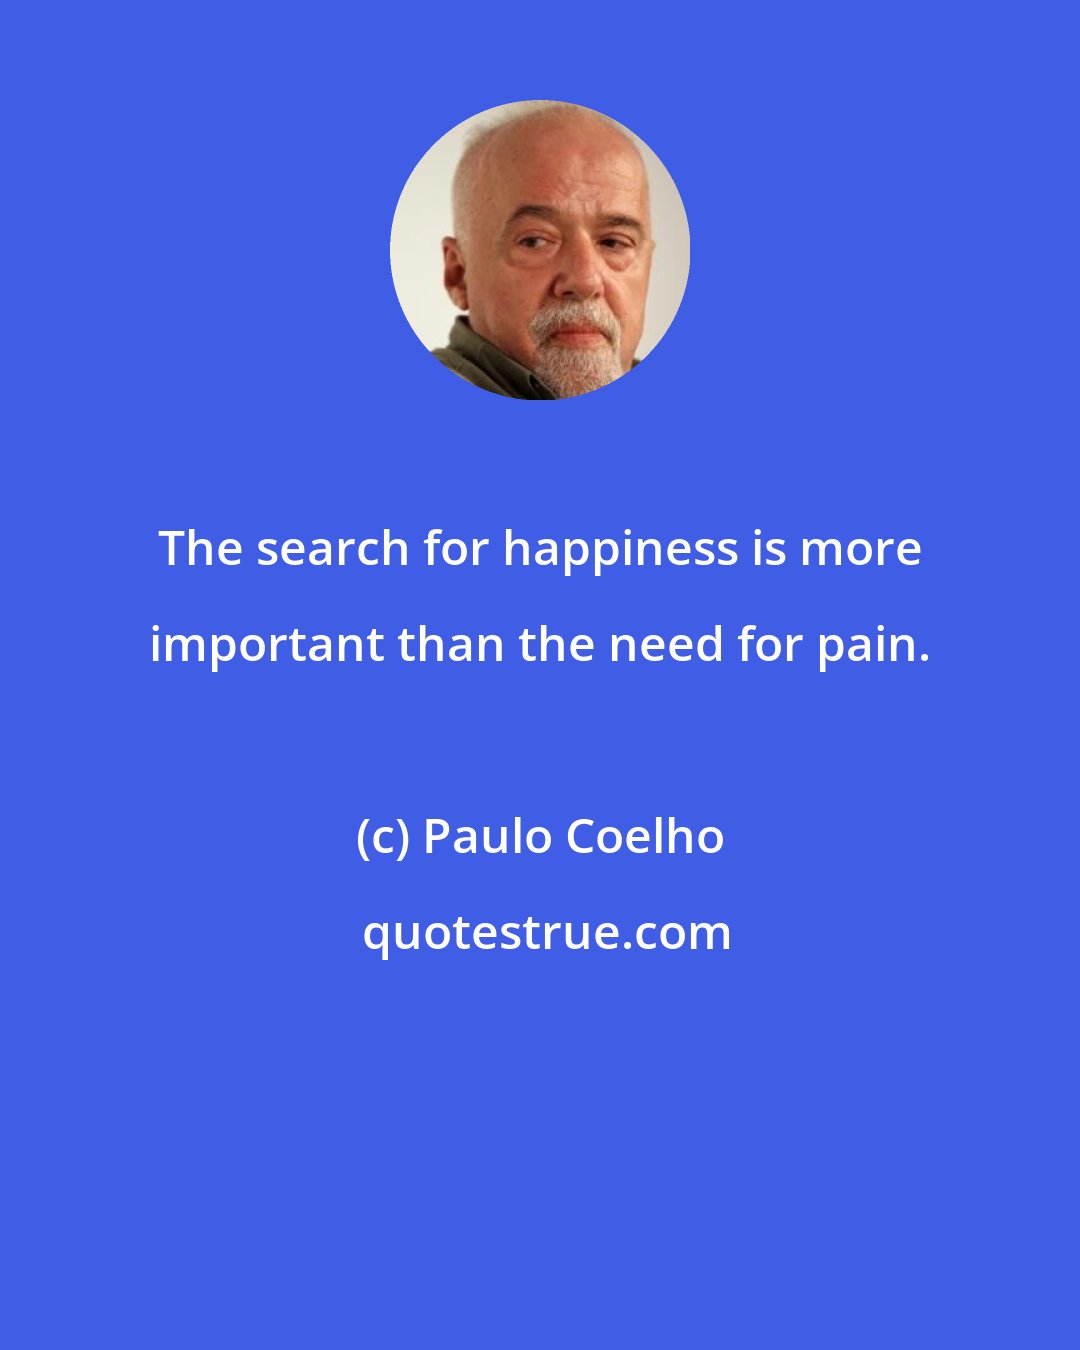 Paulo Coelho: The search for happiness is more important than the need for pain.